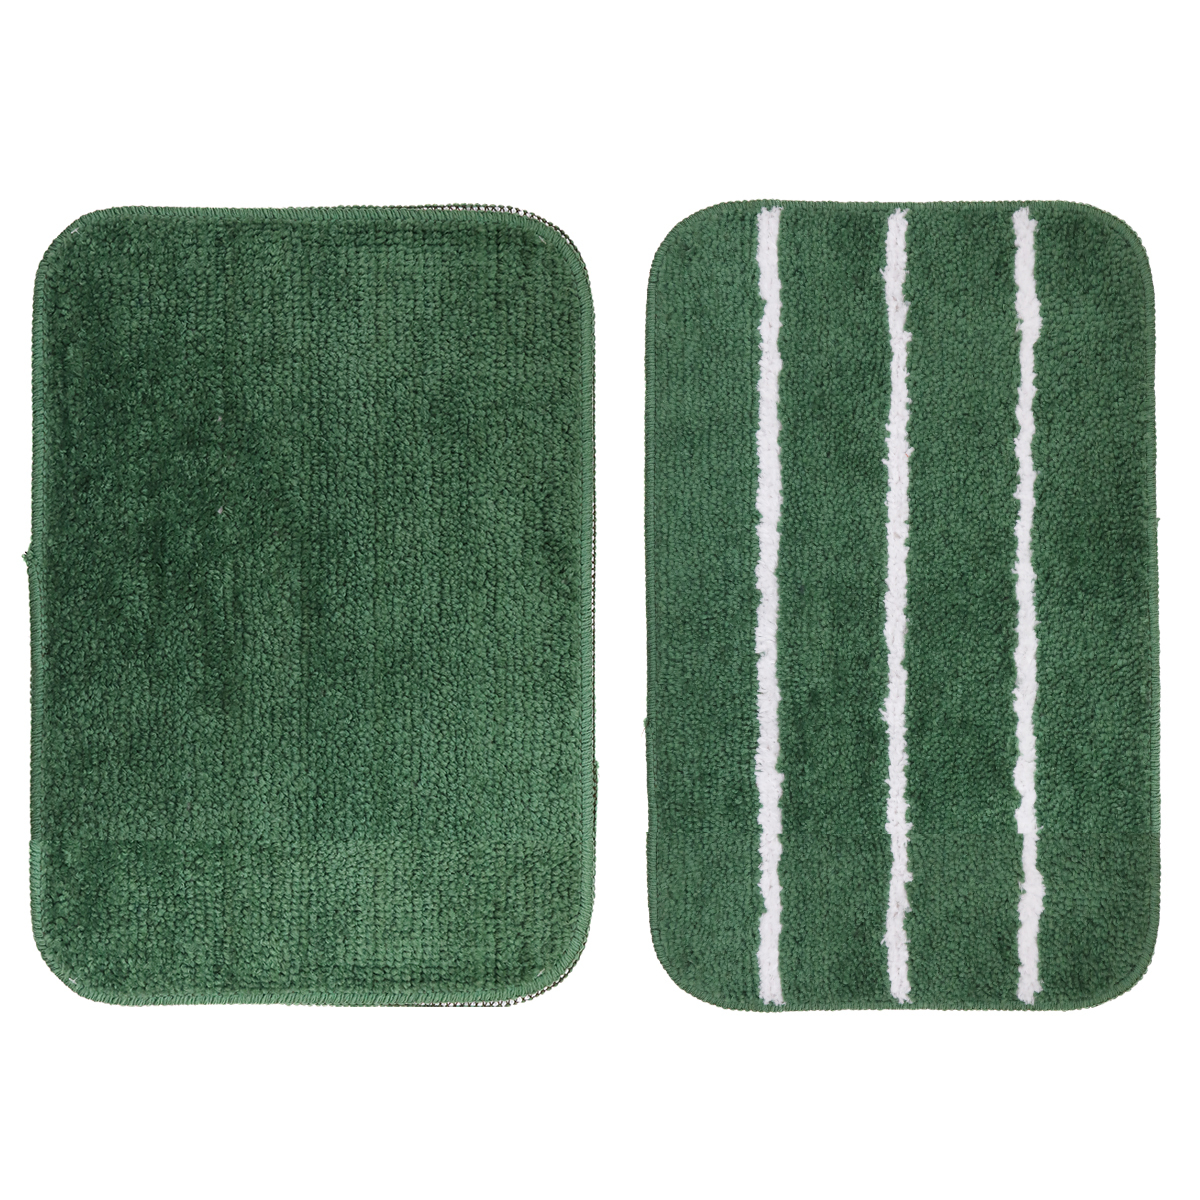 Home Well Micro Bath Mat Assorted Colour | Pack Of 2